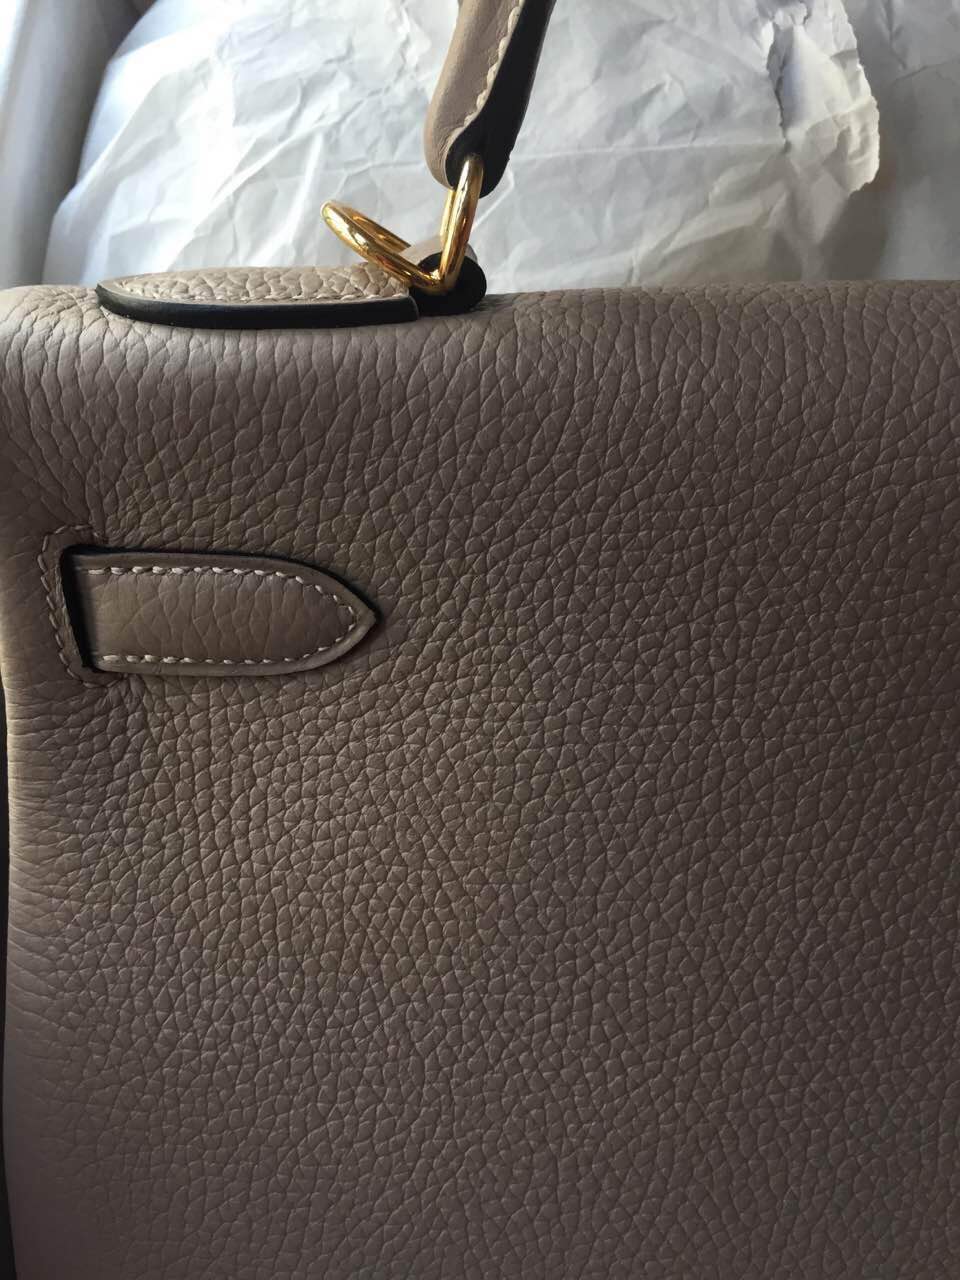 Hand Stitching Hermes Gris Tourterelle Clemence Leather Kelly Bag ...  